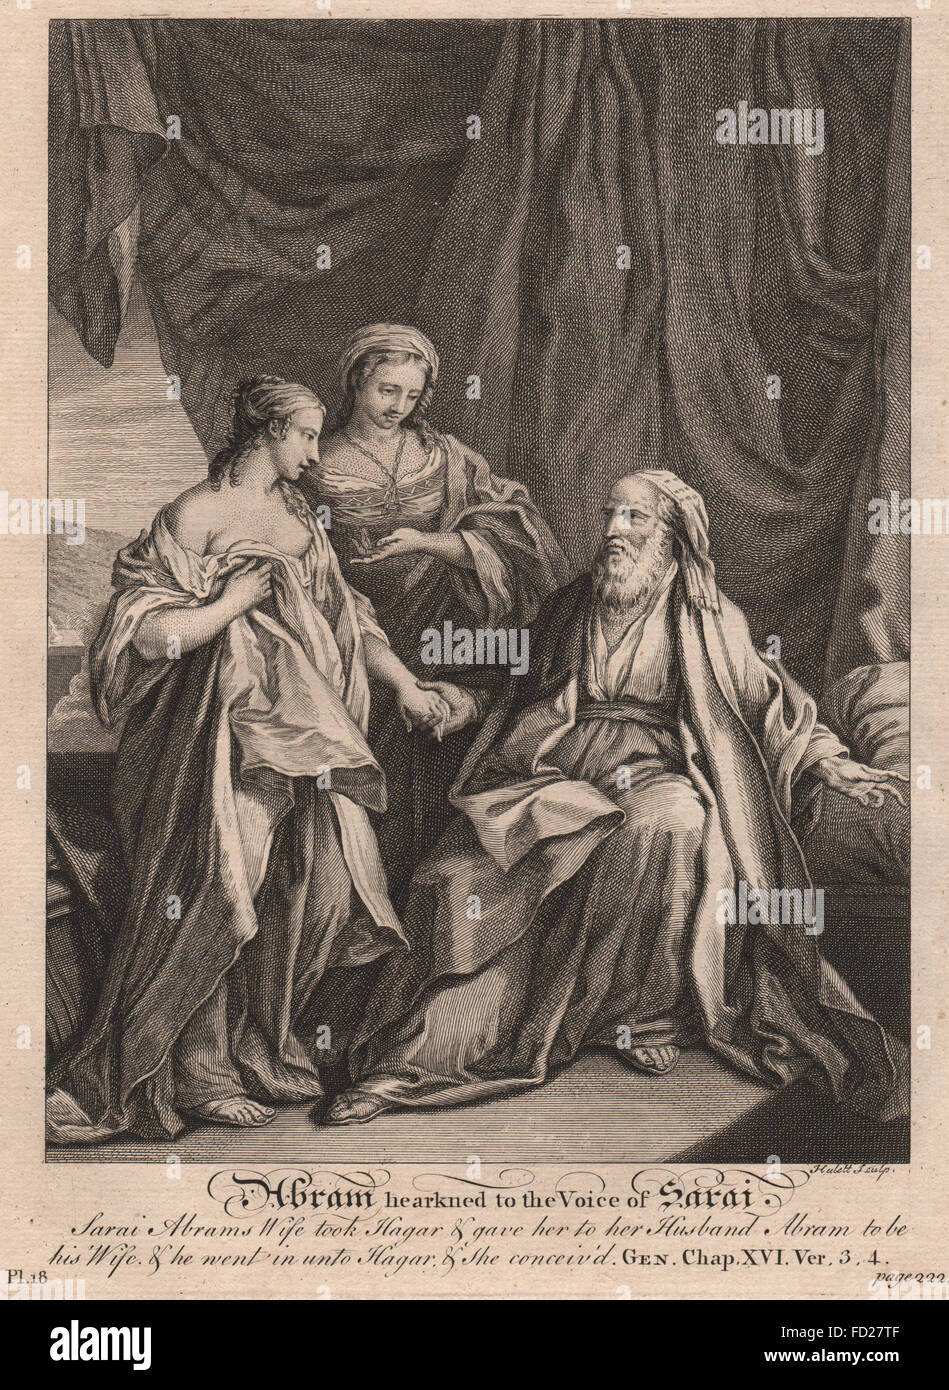 BIBLE: Genesis 16:3-4 Abram hearkned to the voice of Sarai, antique print 1752 Stock Photo